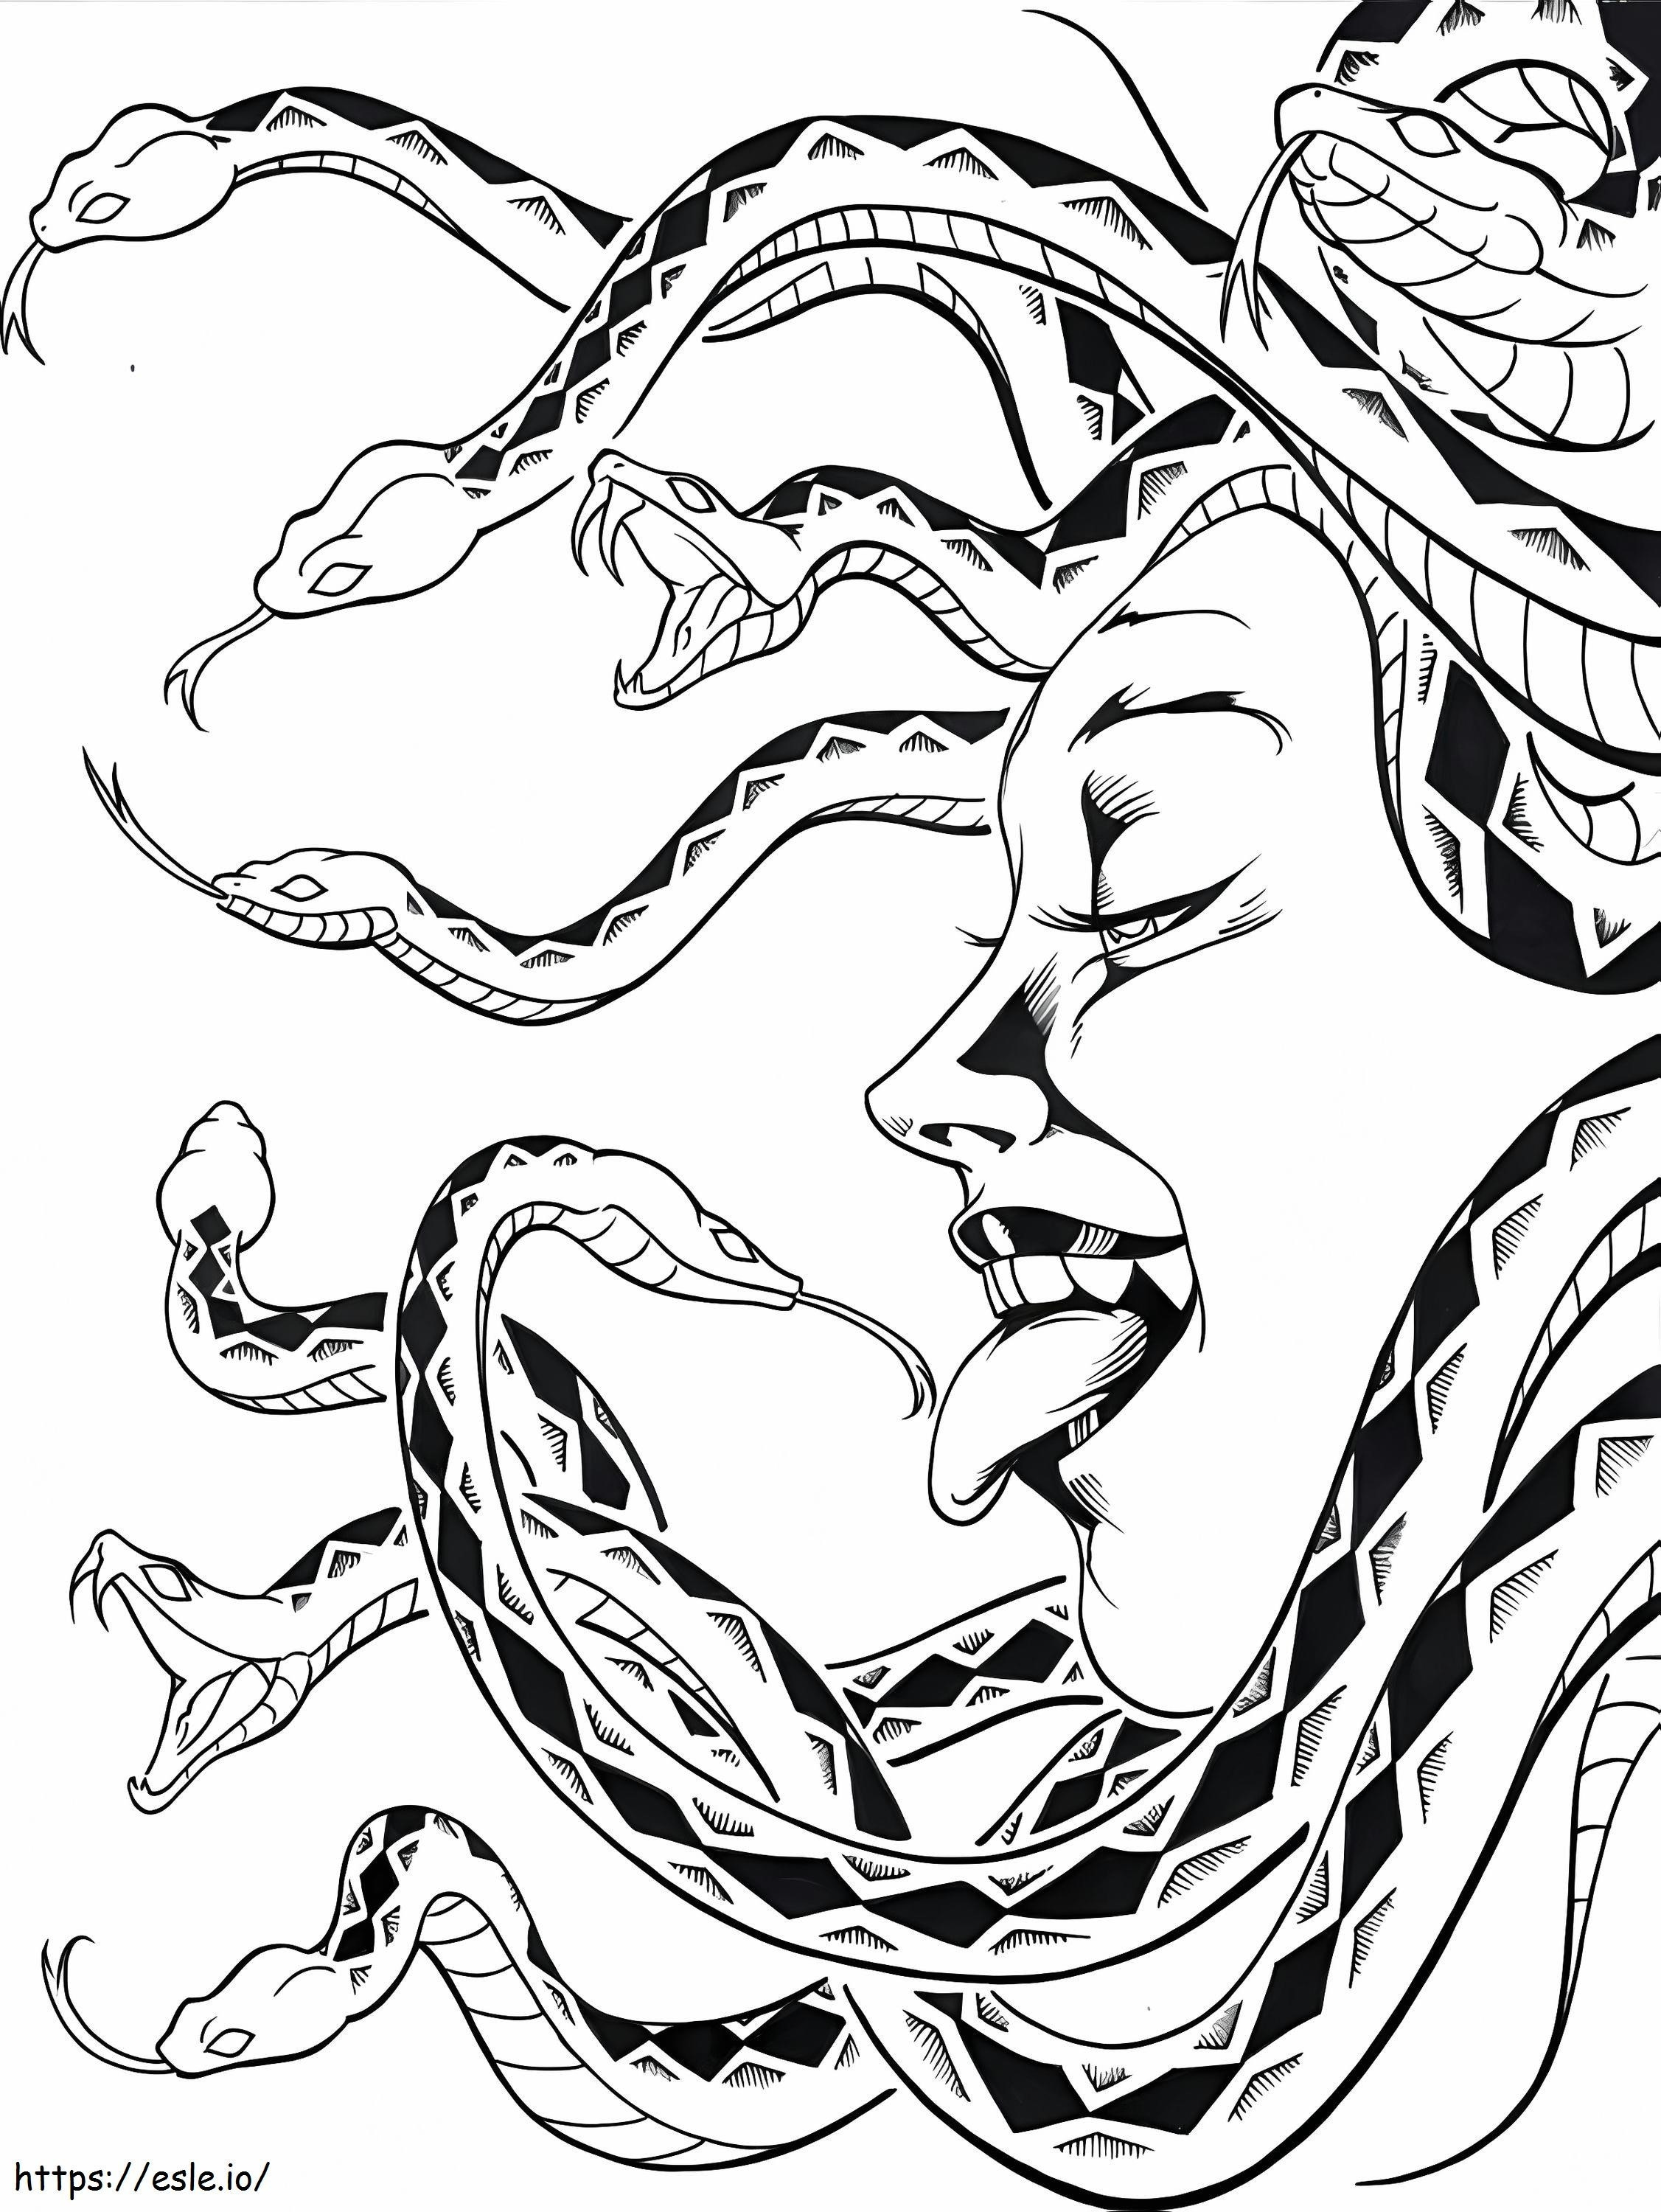 Medusa Smiling coloring page